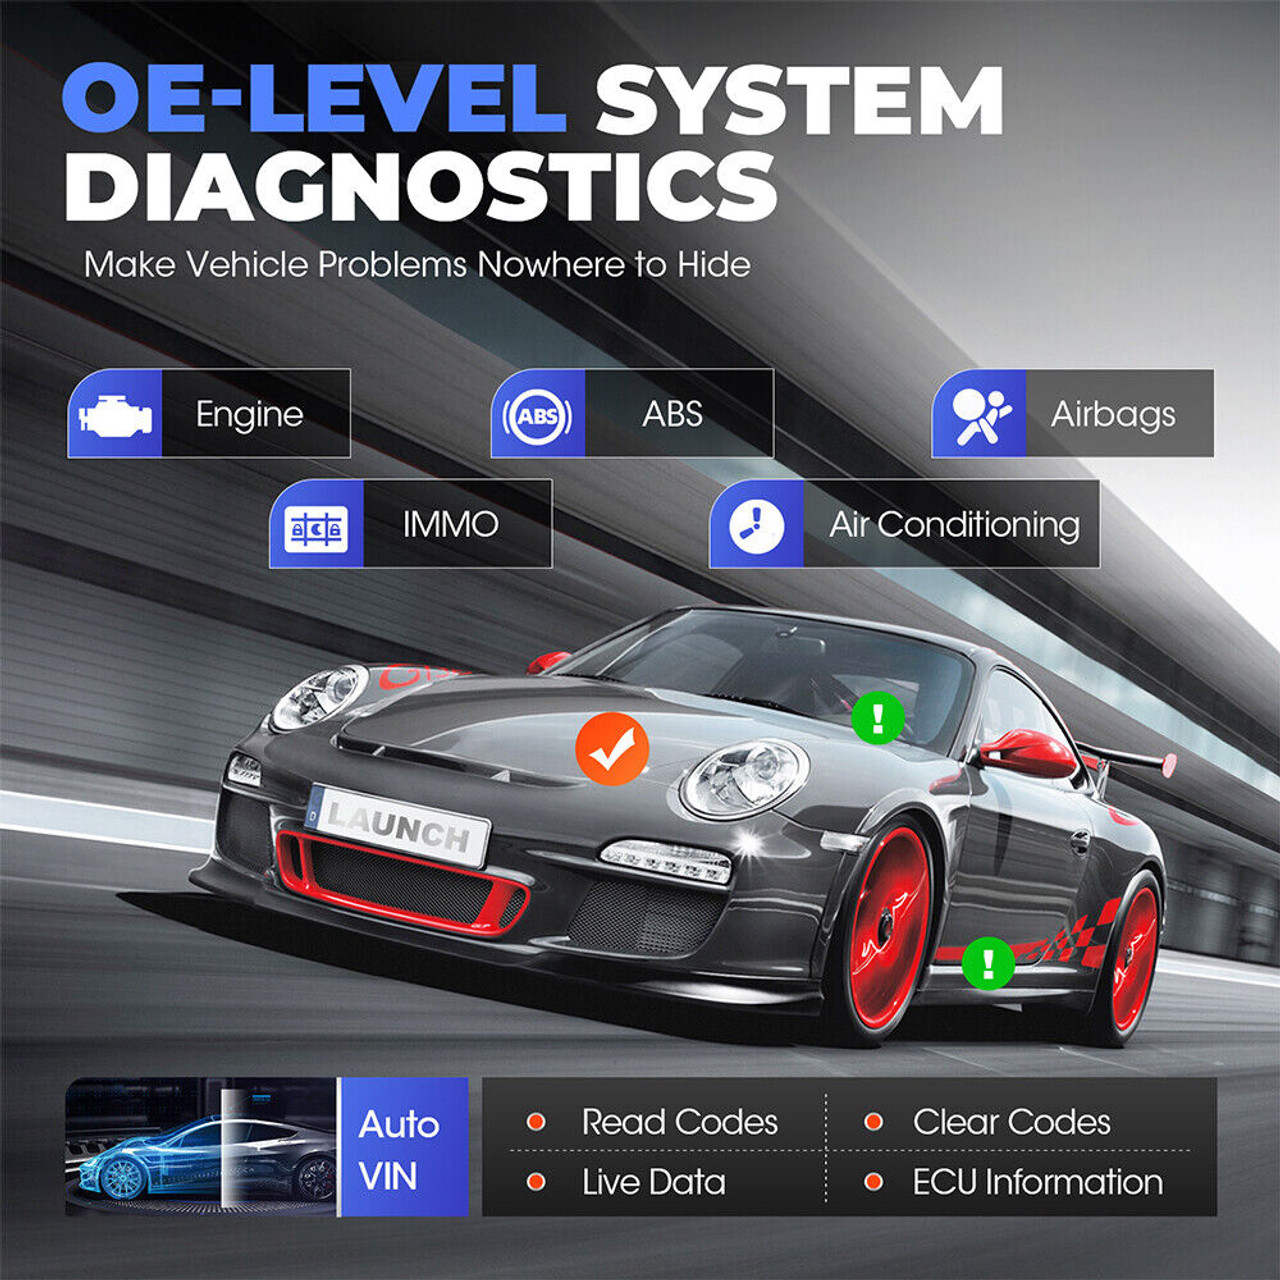 Bi-directional Test OBD2 Bluetooth Automotive Diagnostic Tablet Scanner  Tool - Performance Chip Tuning